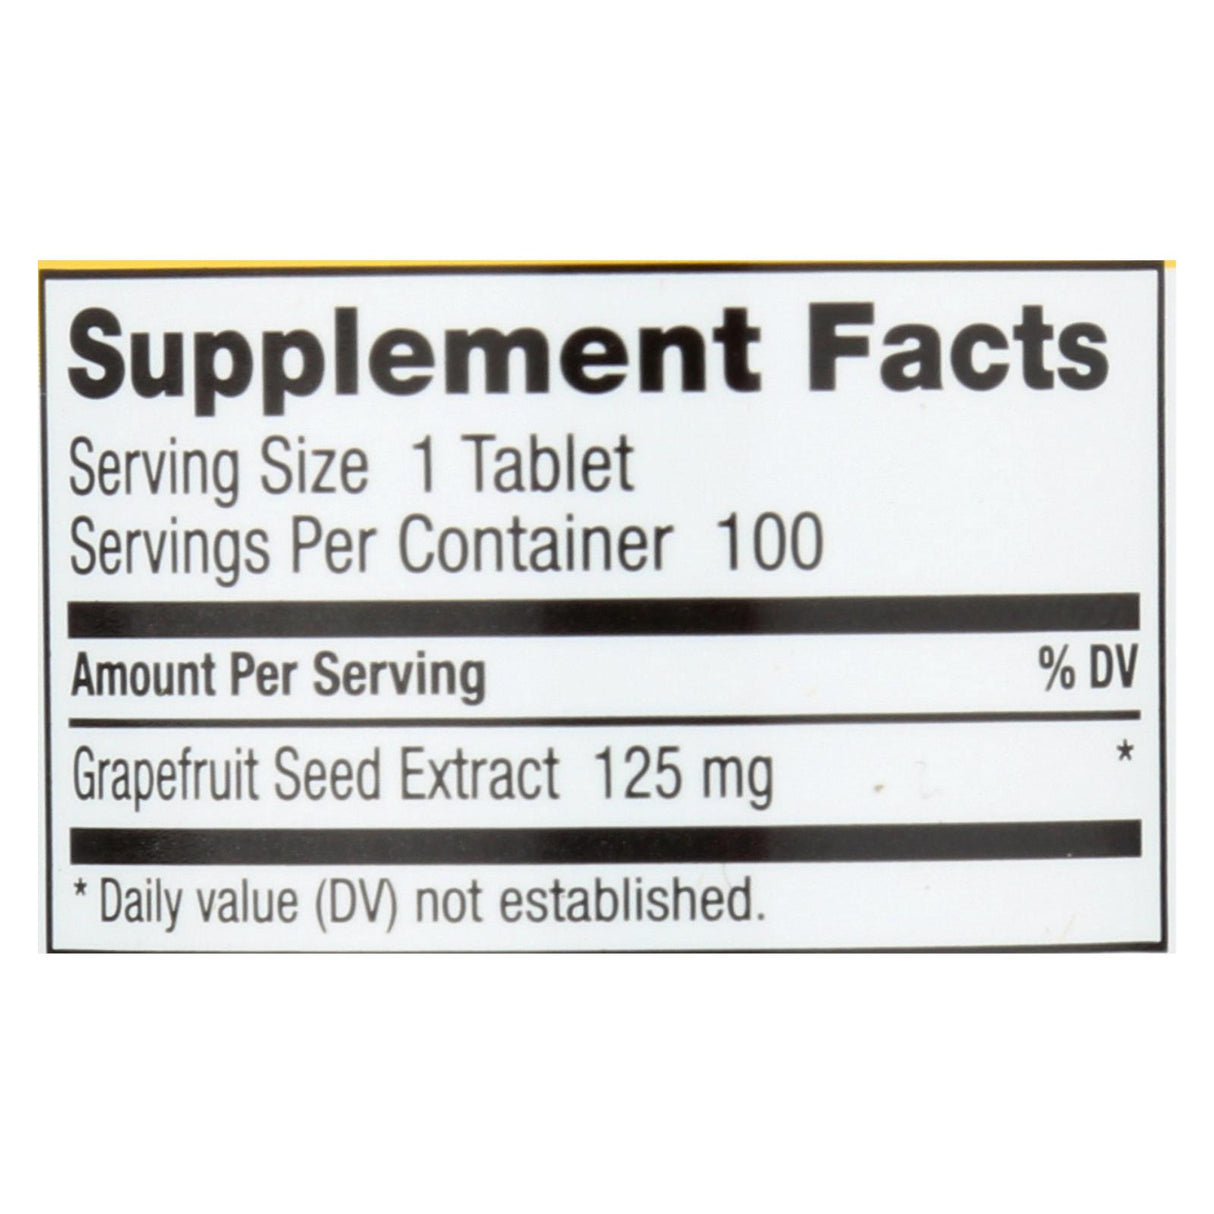 Nutribiotic Grapefruit Seed Extract 125 Tablets (Pack of 100) - Cozy Farm 